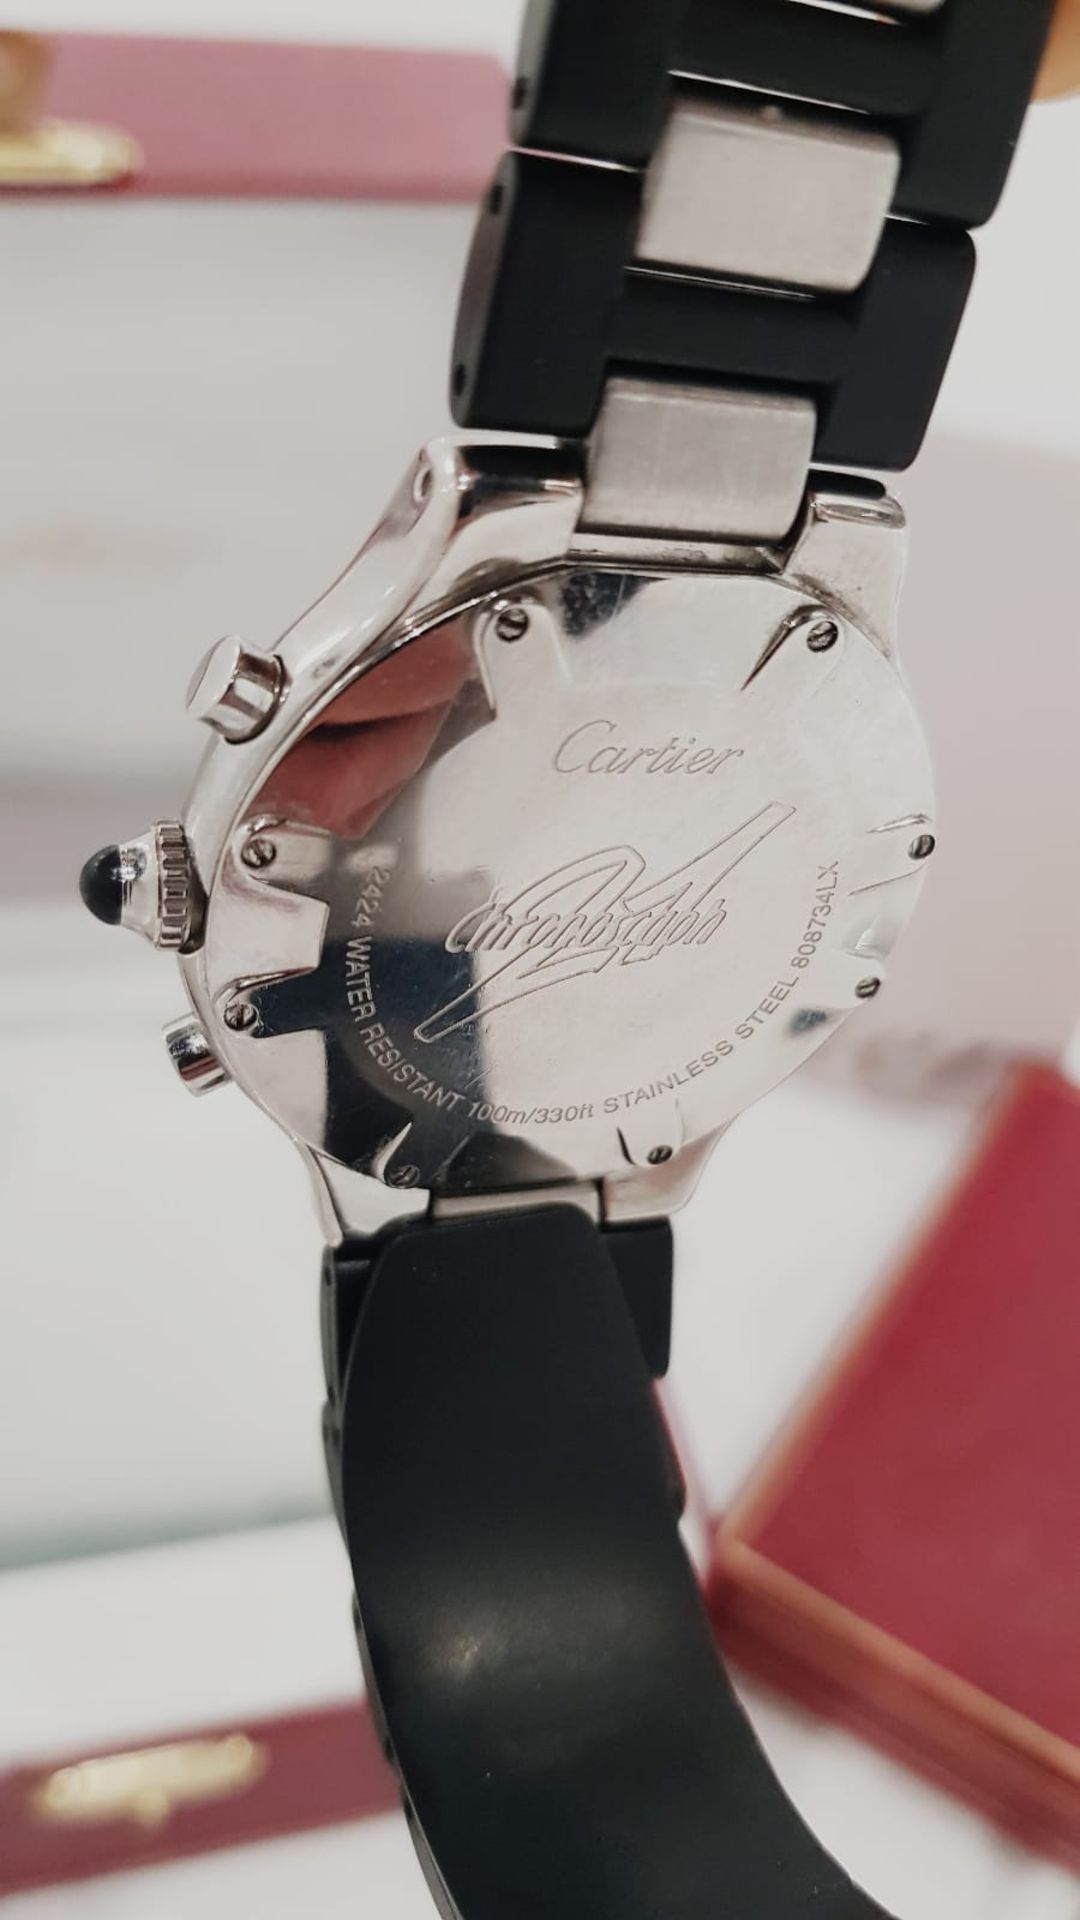 CARTIER CHRONOSCAPH GENTS WATCH WITH ORIGINAL BOX & MANUAL, STEEL AND RUBBER STRAP. - Image 6 of 8